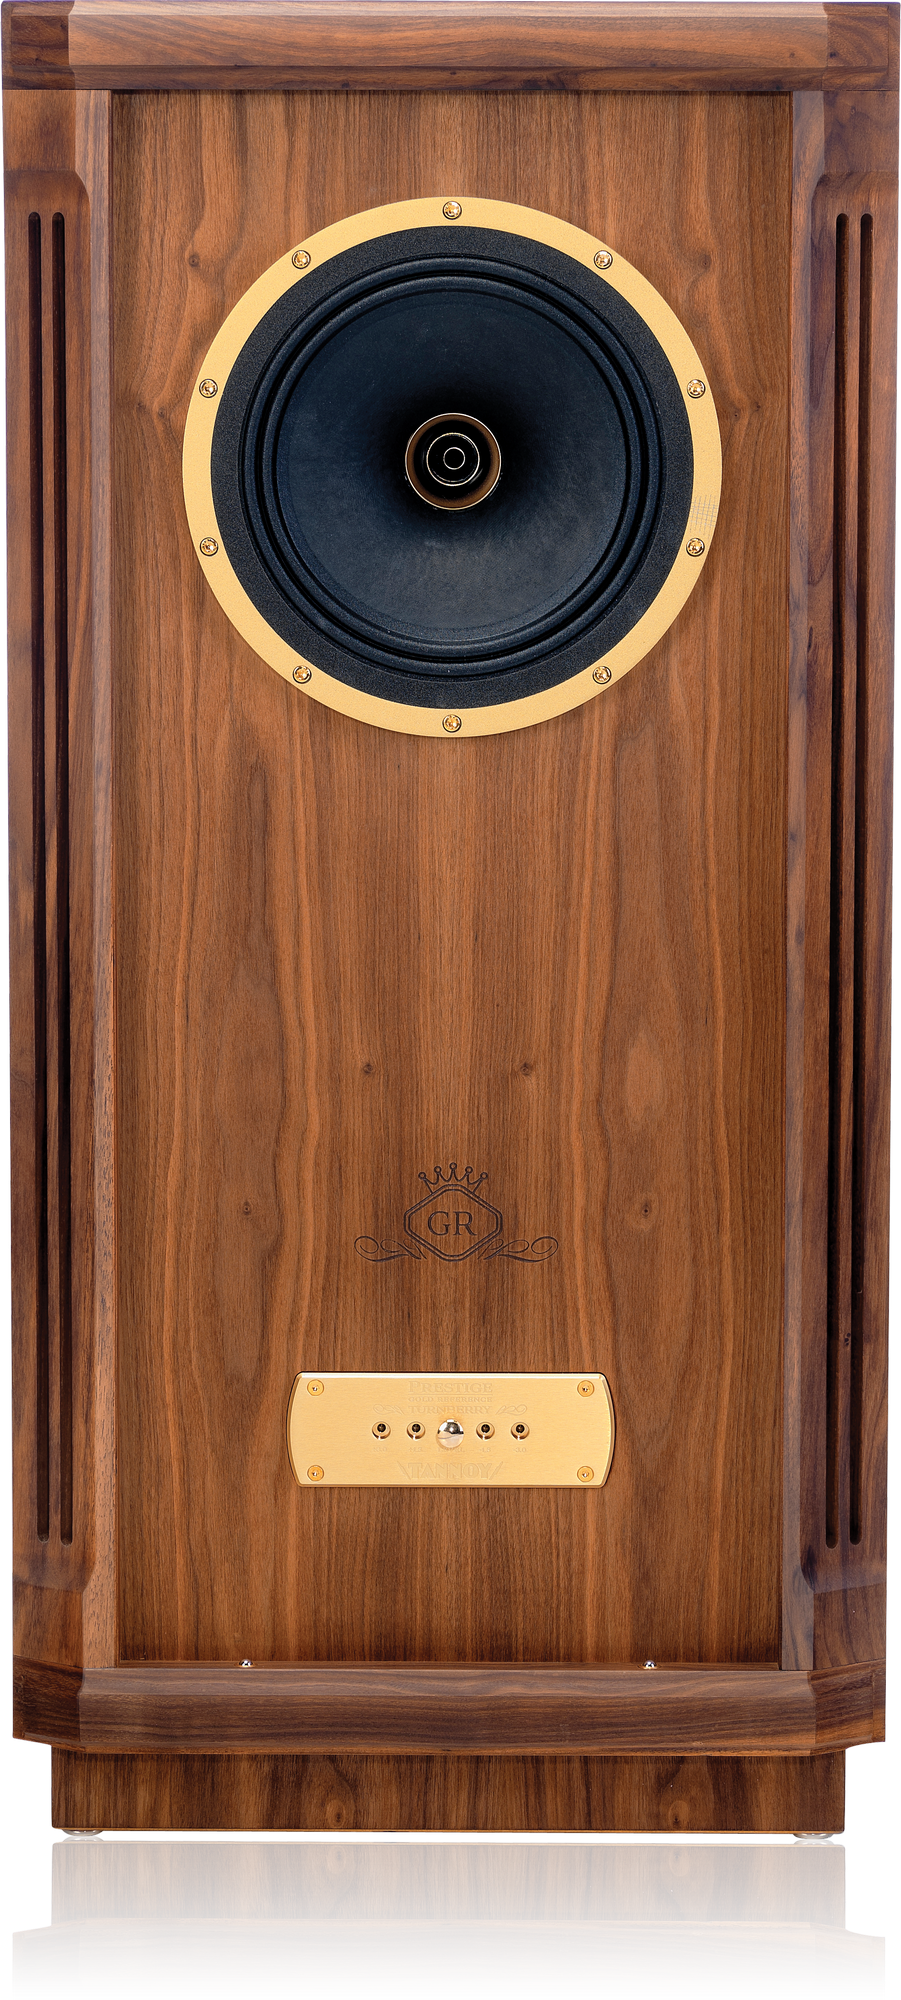 TANNOY PRESTIGE TURNBERRY GR GOLD REFERENCE  AUDIOPHILE LOUD SPEAKERS (PAIR) - SPECIAL ORDER